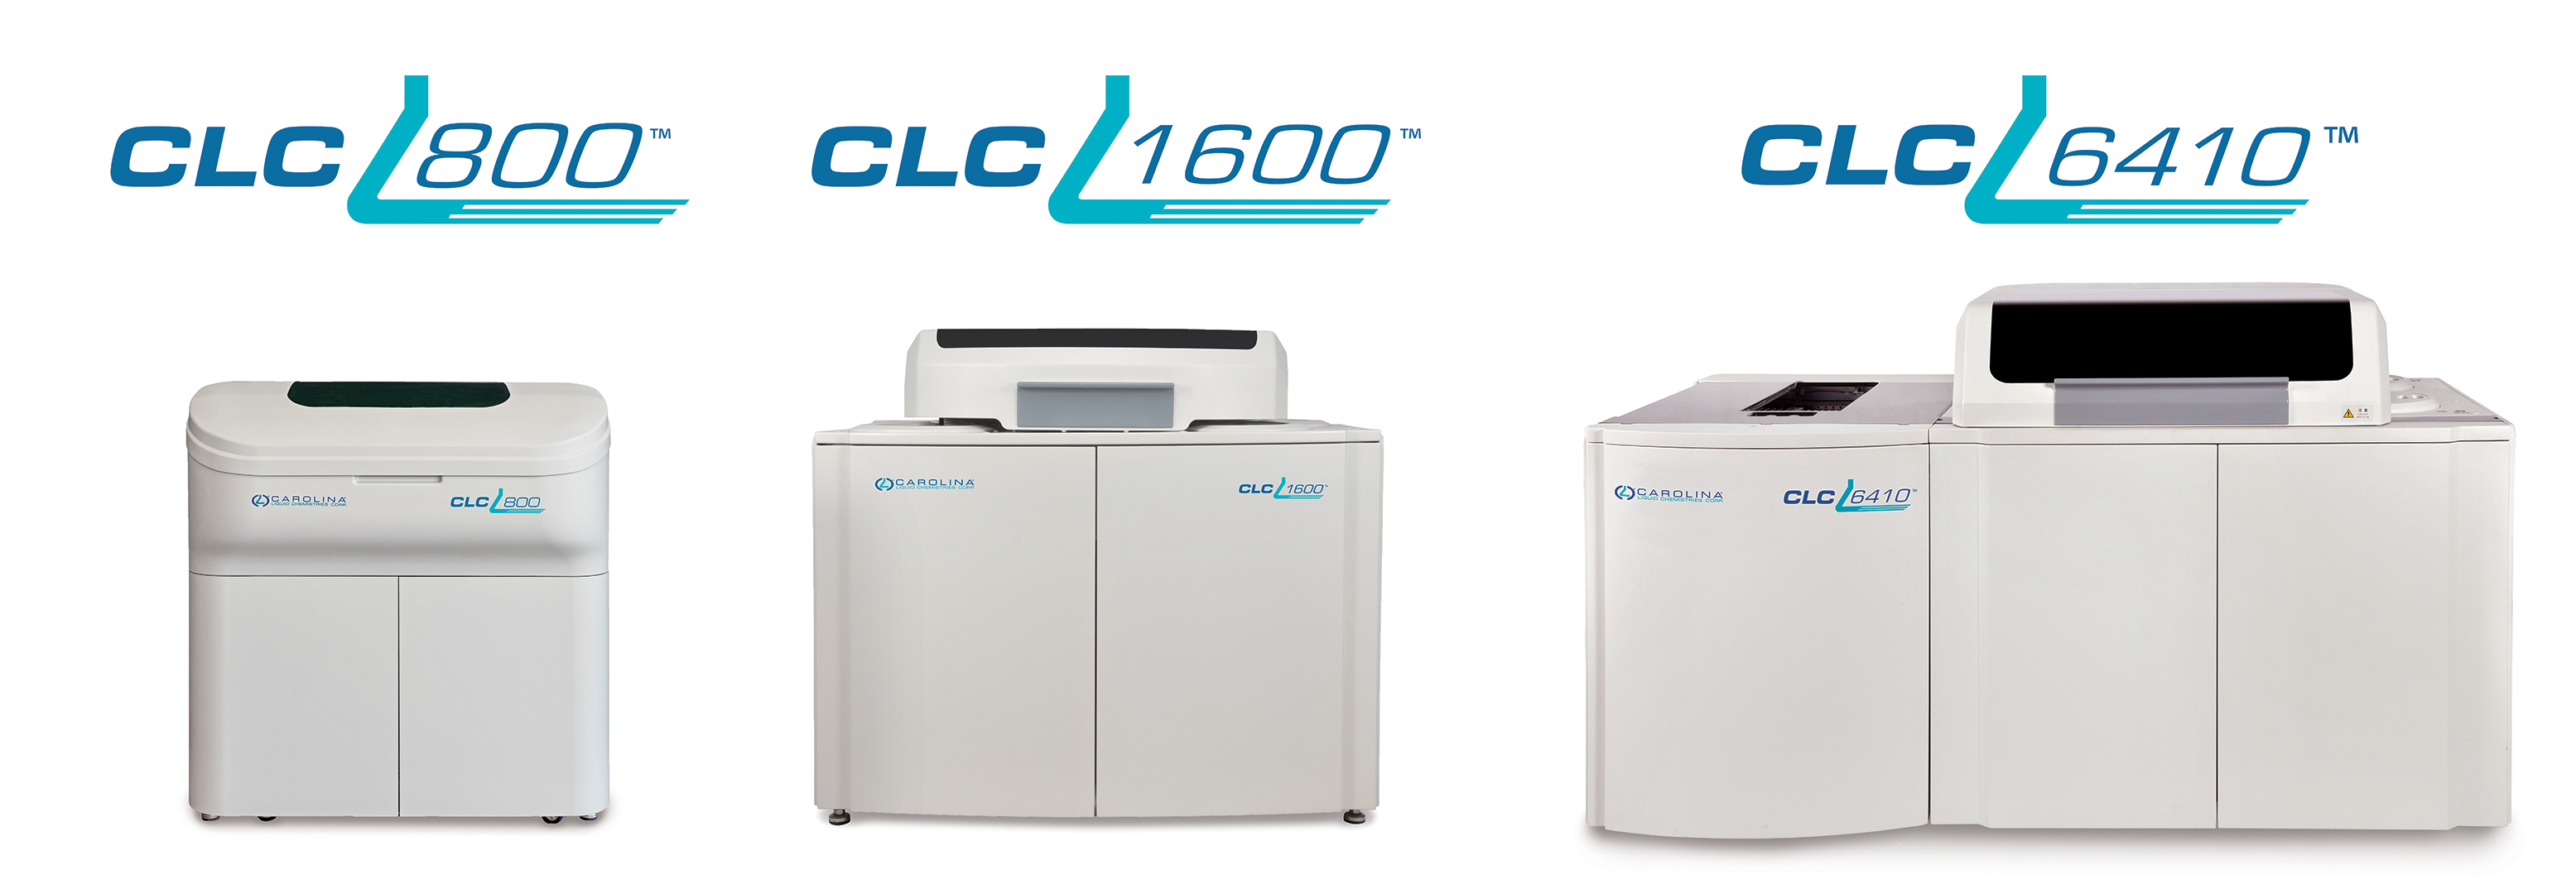 CLC Family of Clinical Chemistry Analyzers - with logos